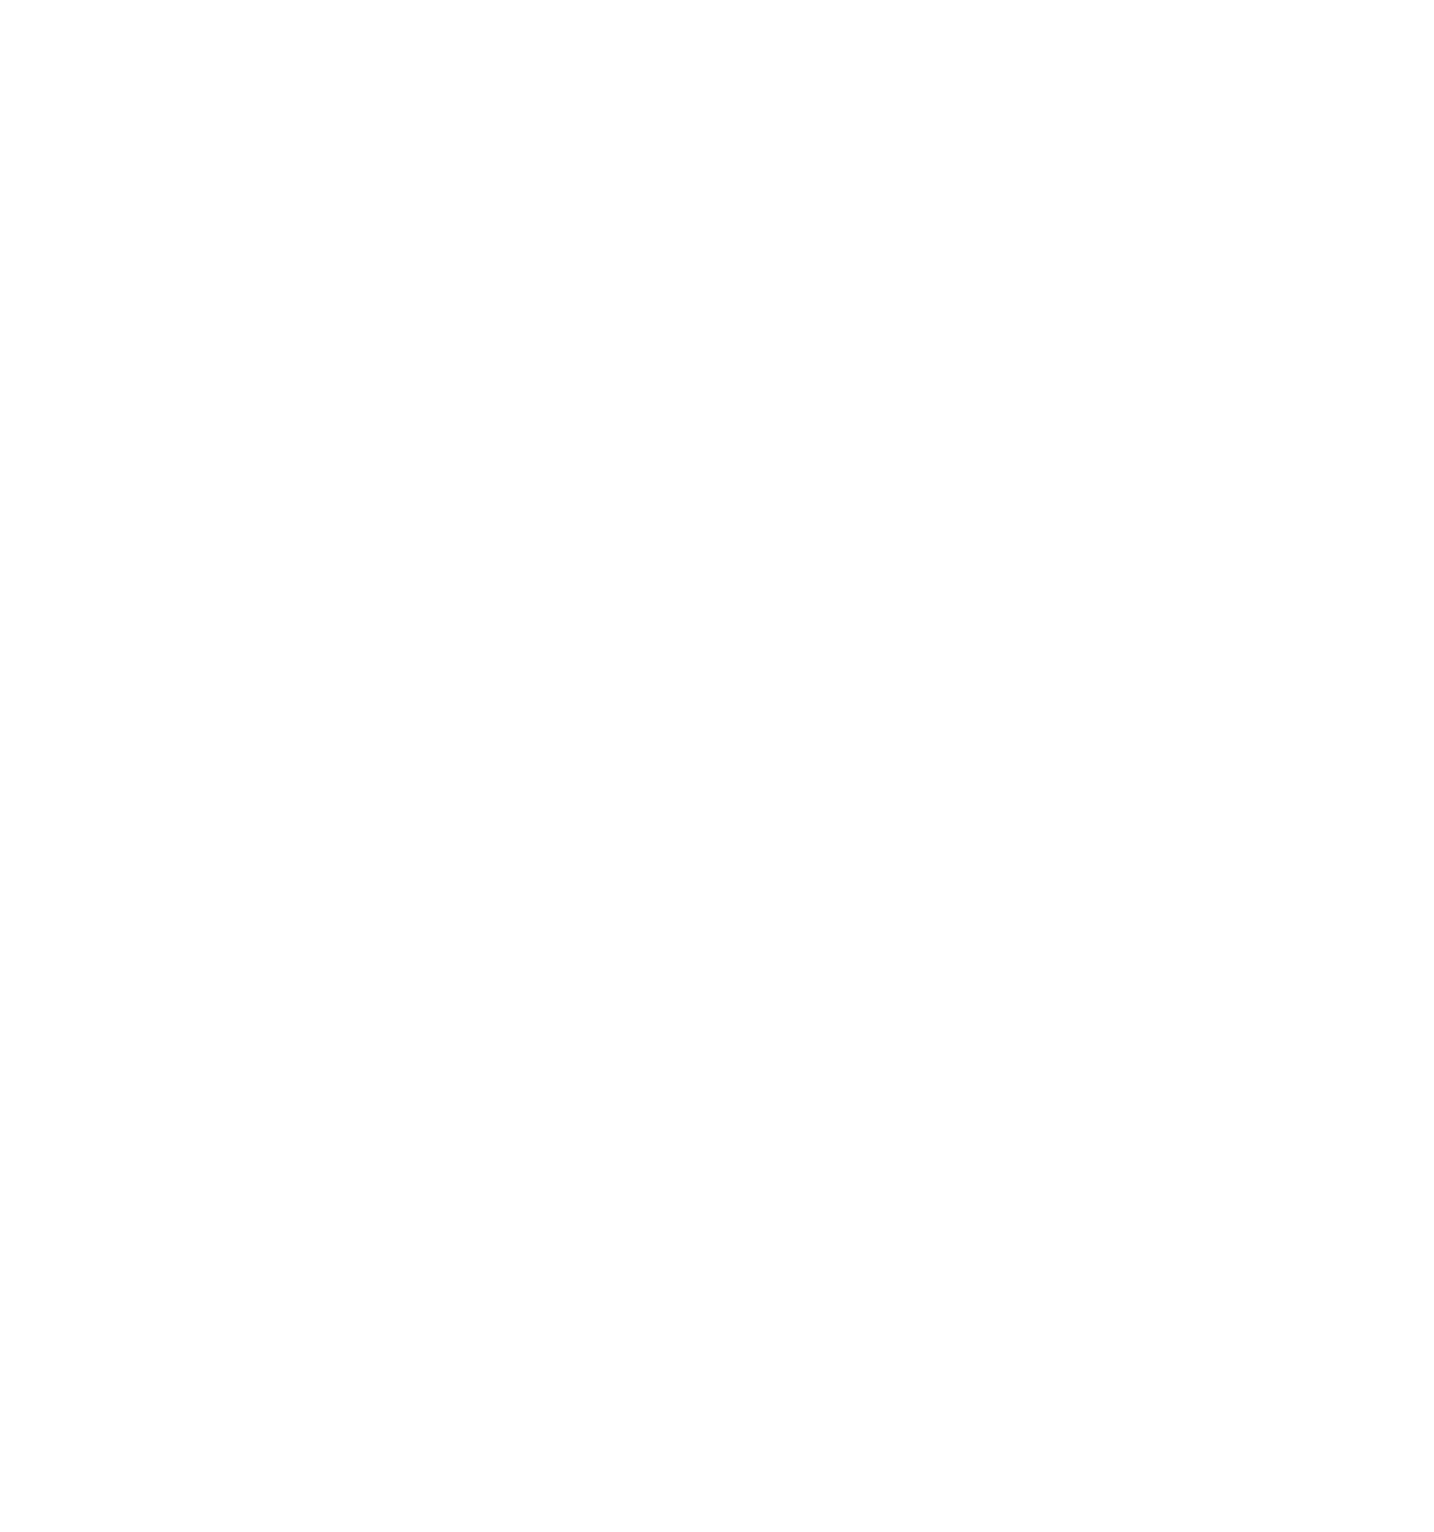 Old Mutual logo for dark backgrounds (transparent PNG)